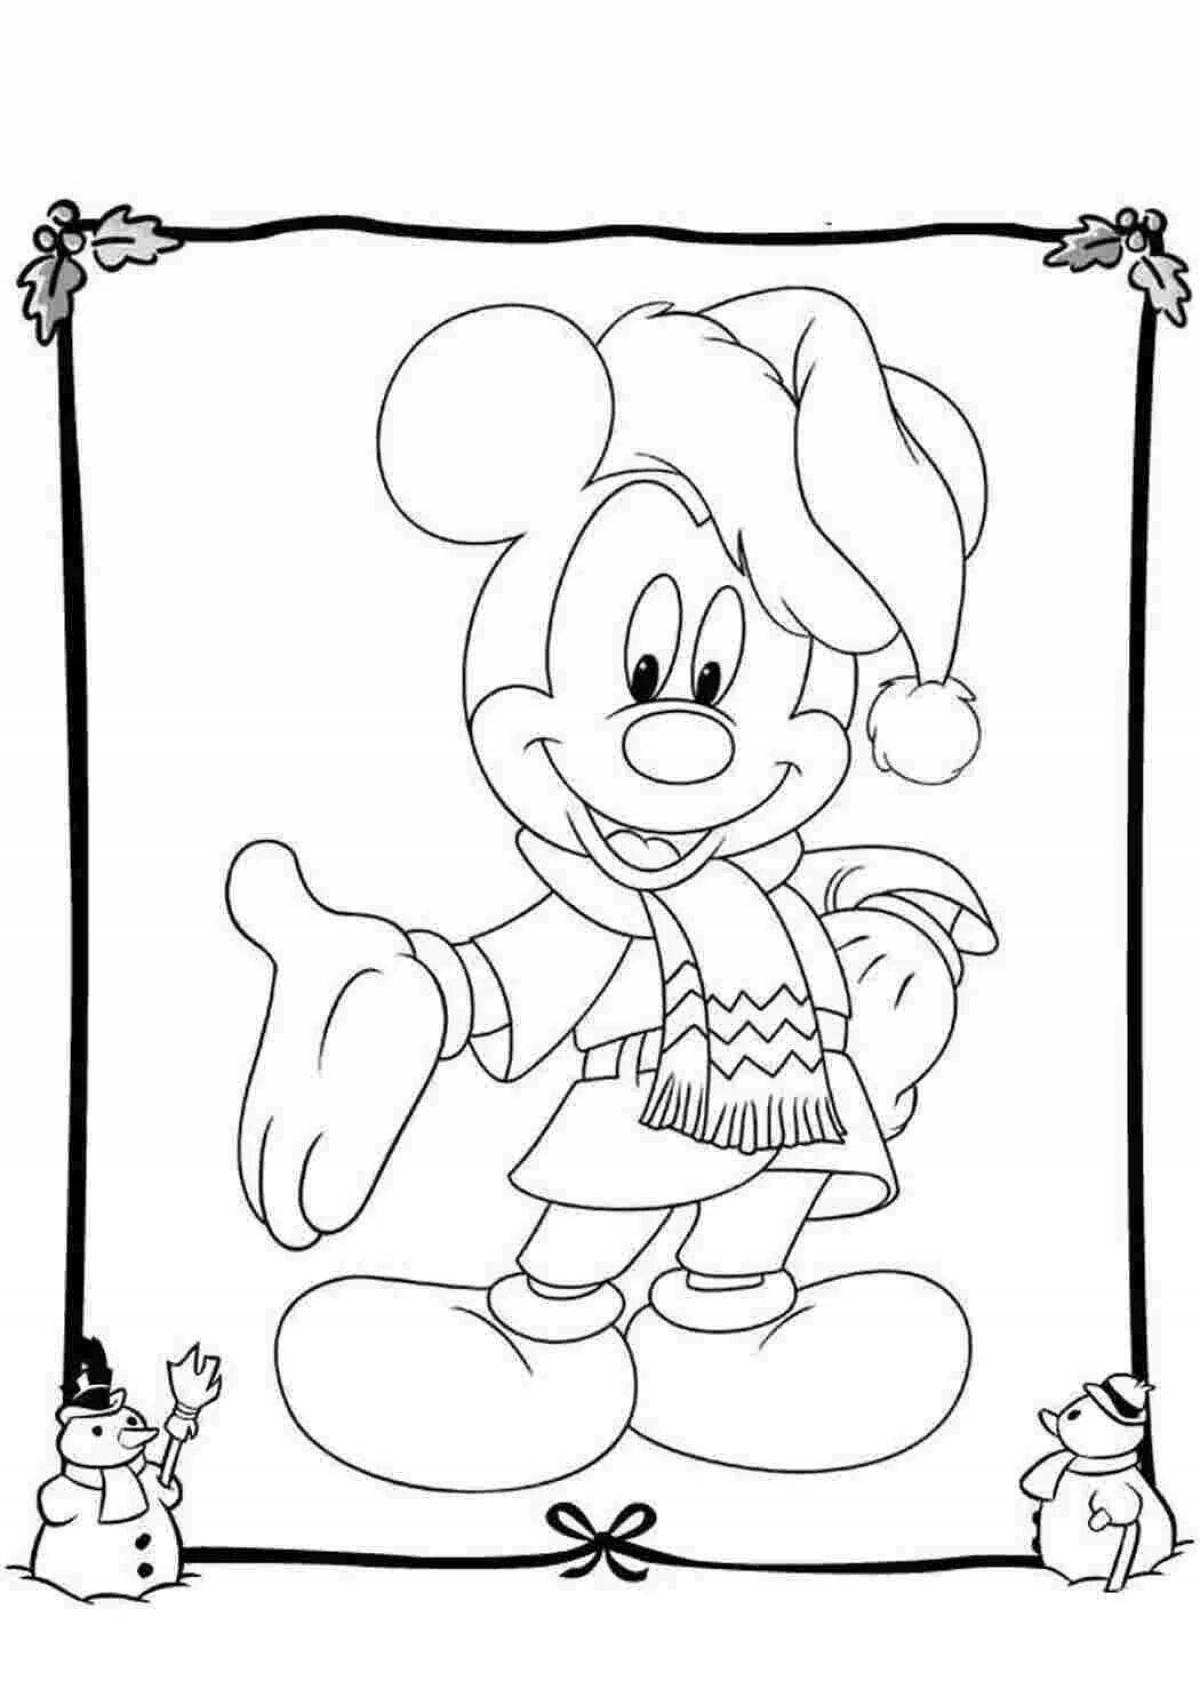 Christmas characters coloring book in bright colors